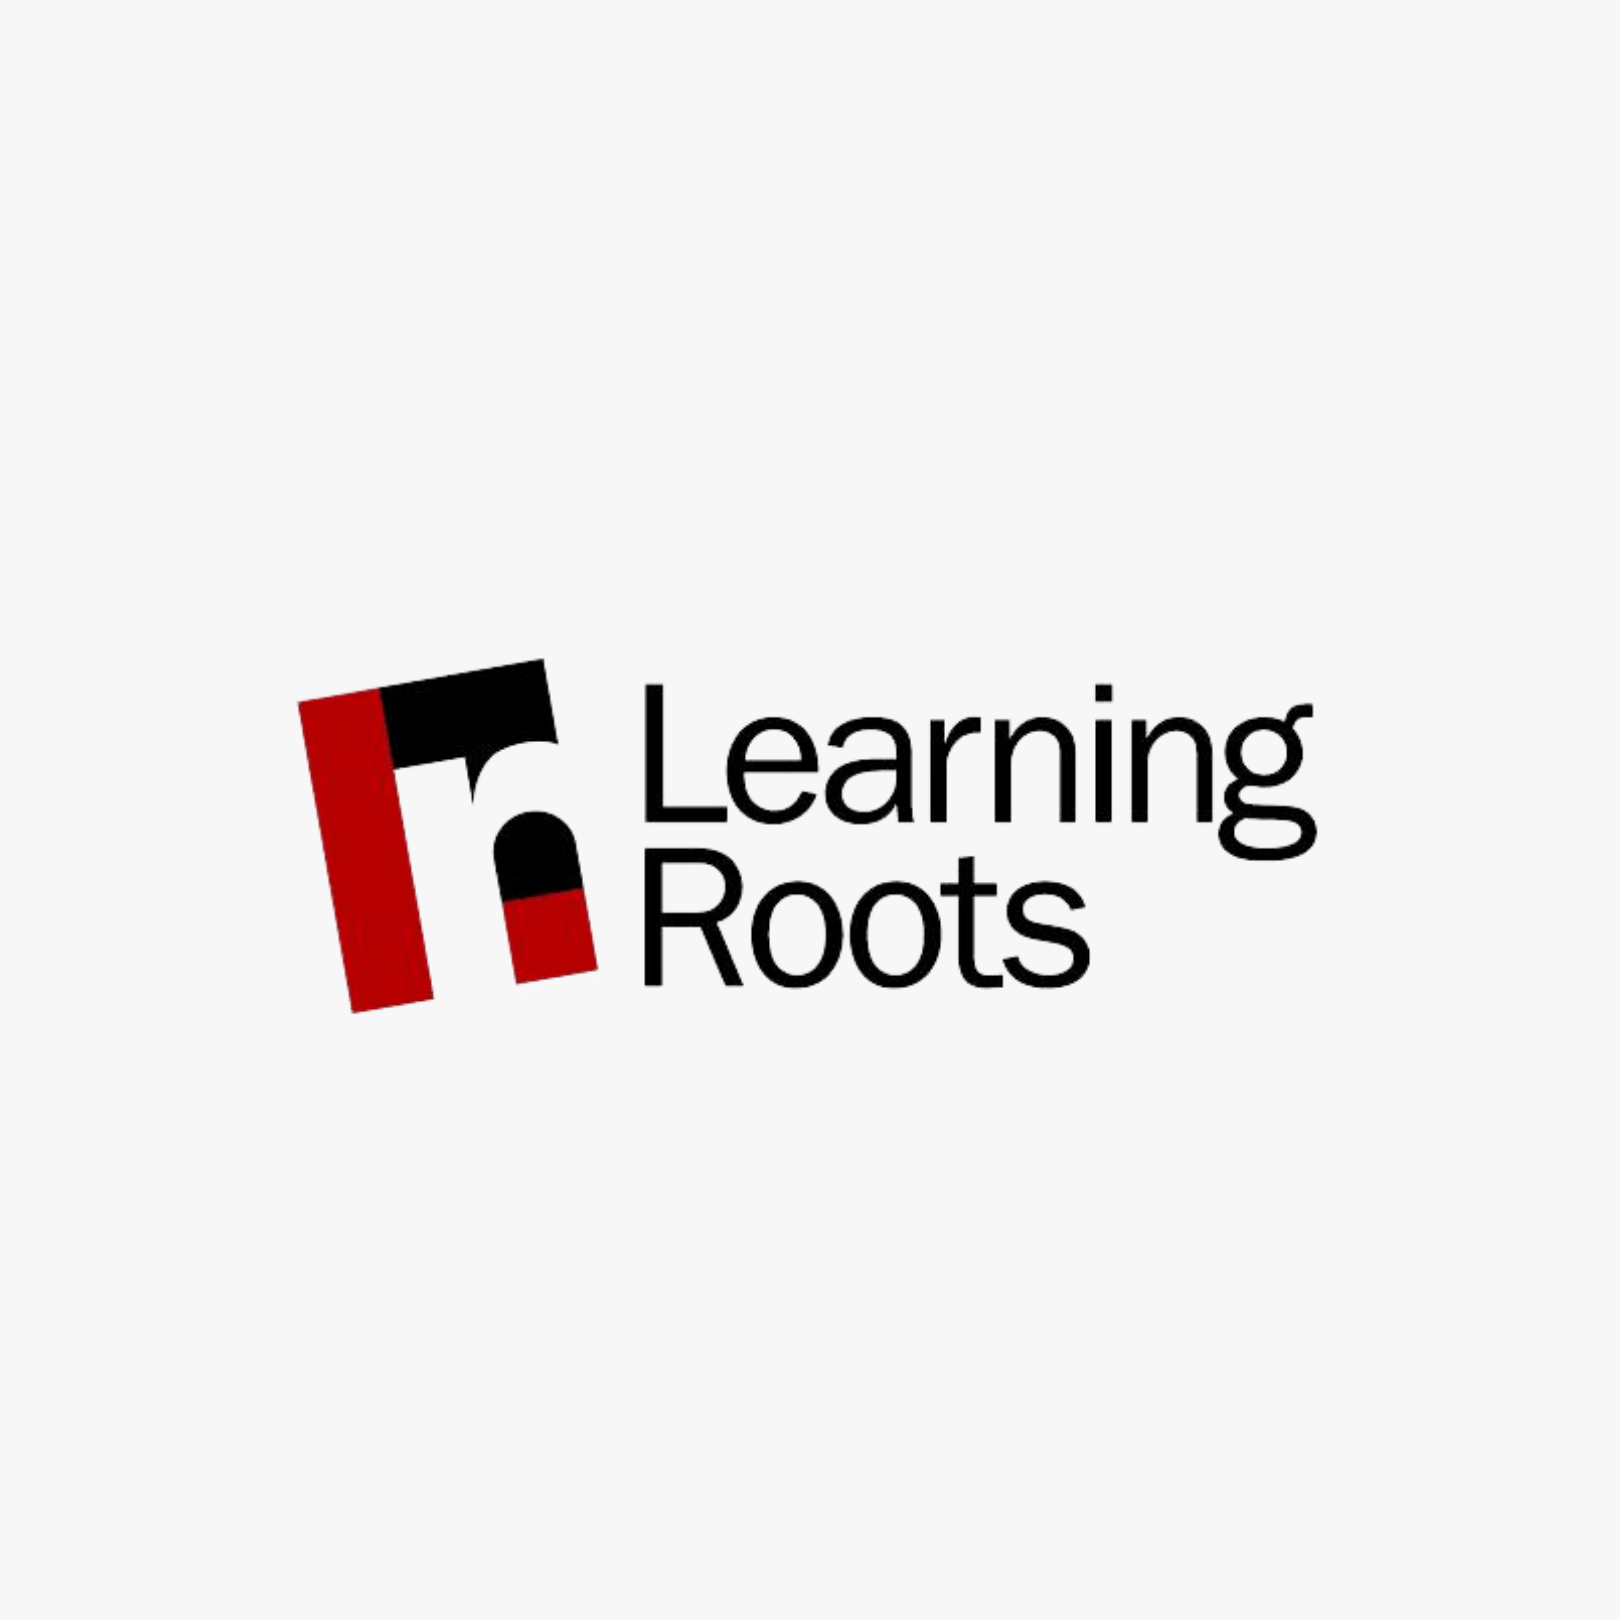 Learning Roots